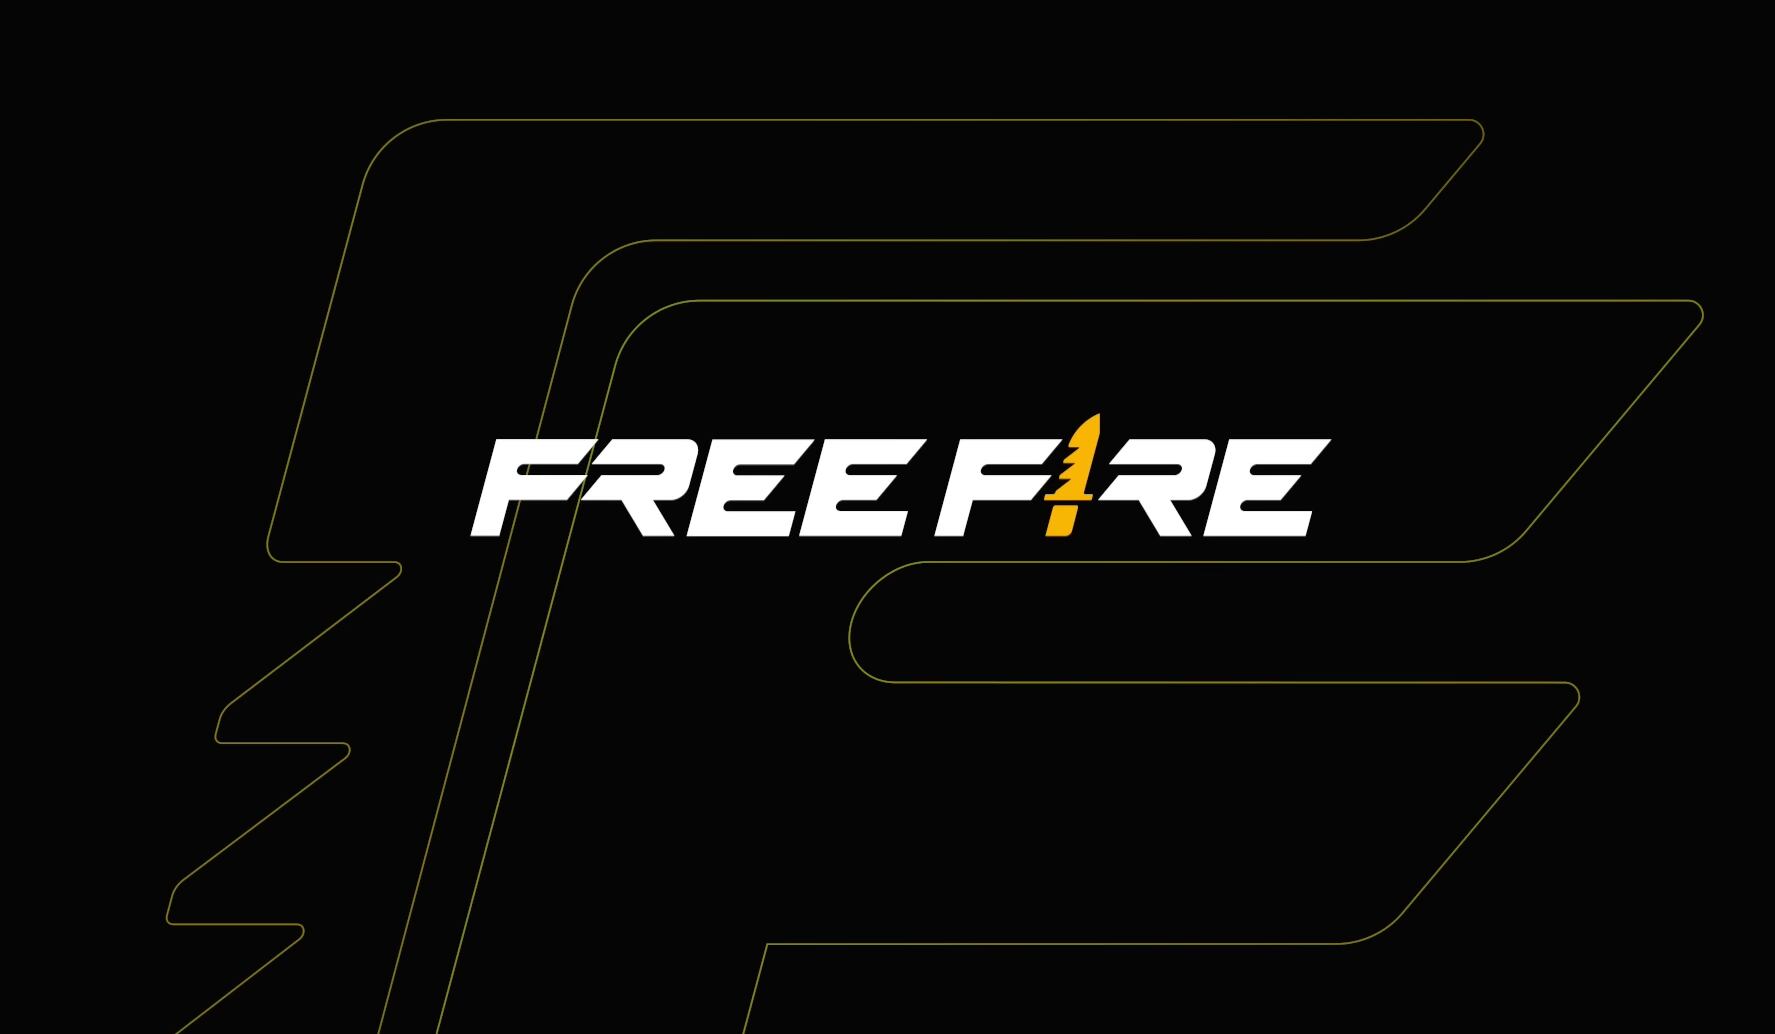 Free Fire está disponible Play Store y App Store. (YouTube: Garena Free Fire Global)